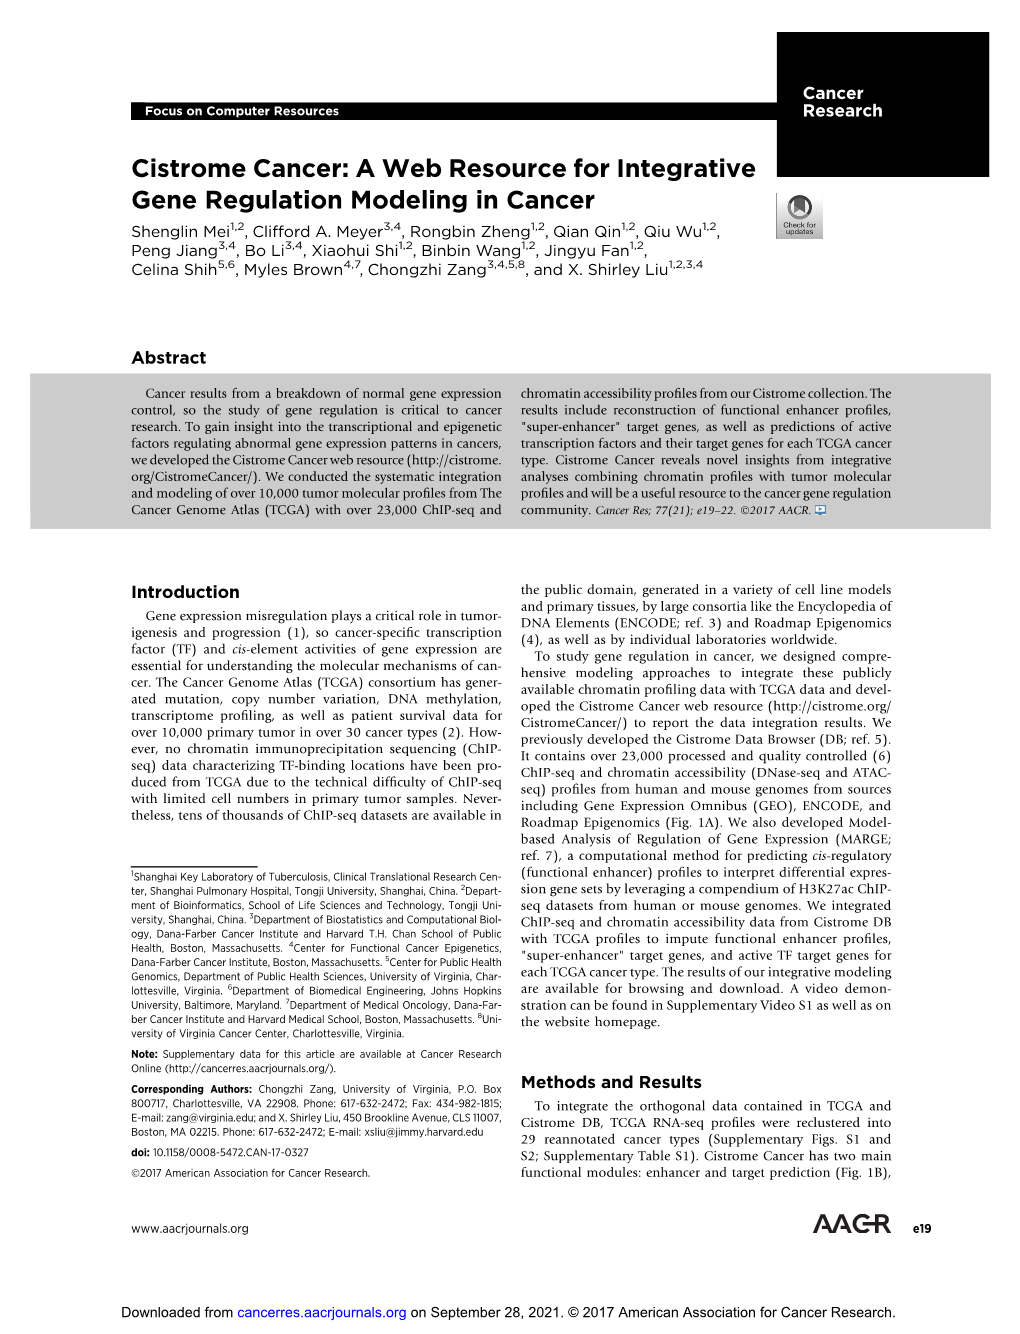 Cistrome Cancer: a Web Resource for Integrative Gene Regulation Modeling in Cancer Shenglin Mei1,2, Clifford A